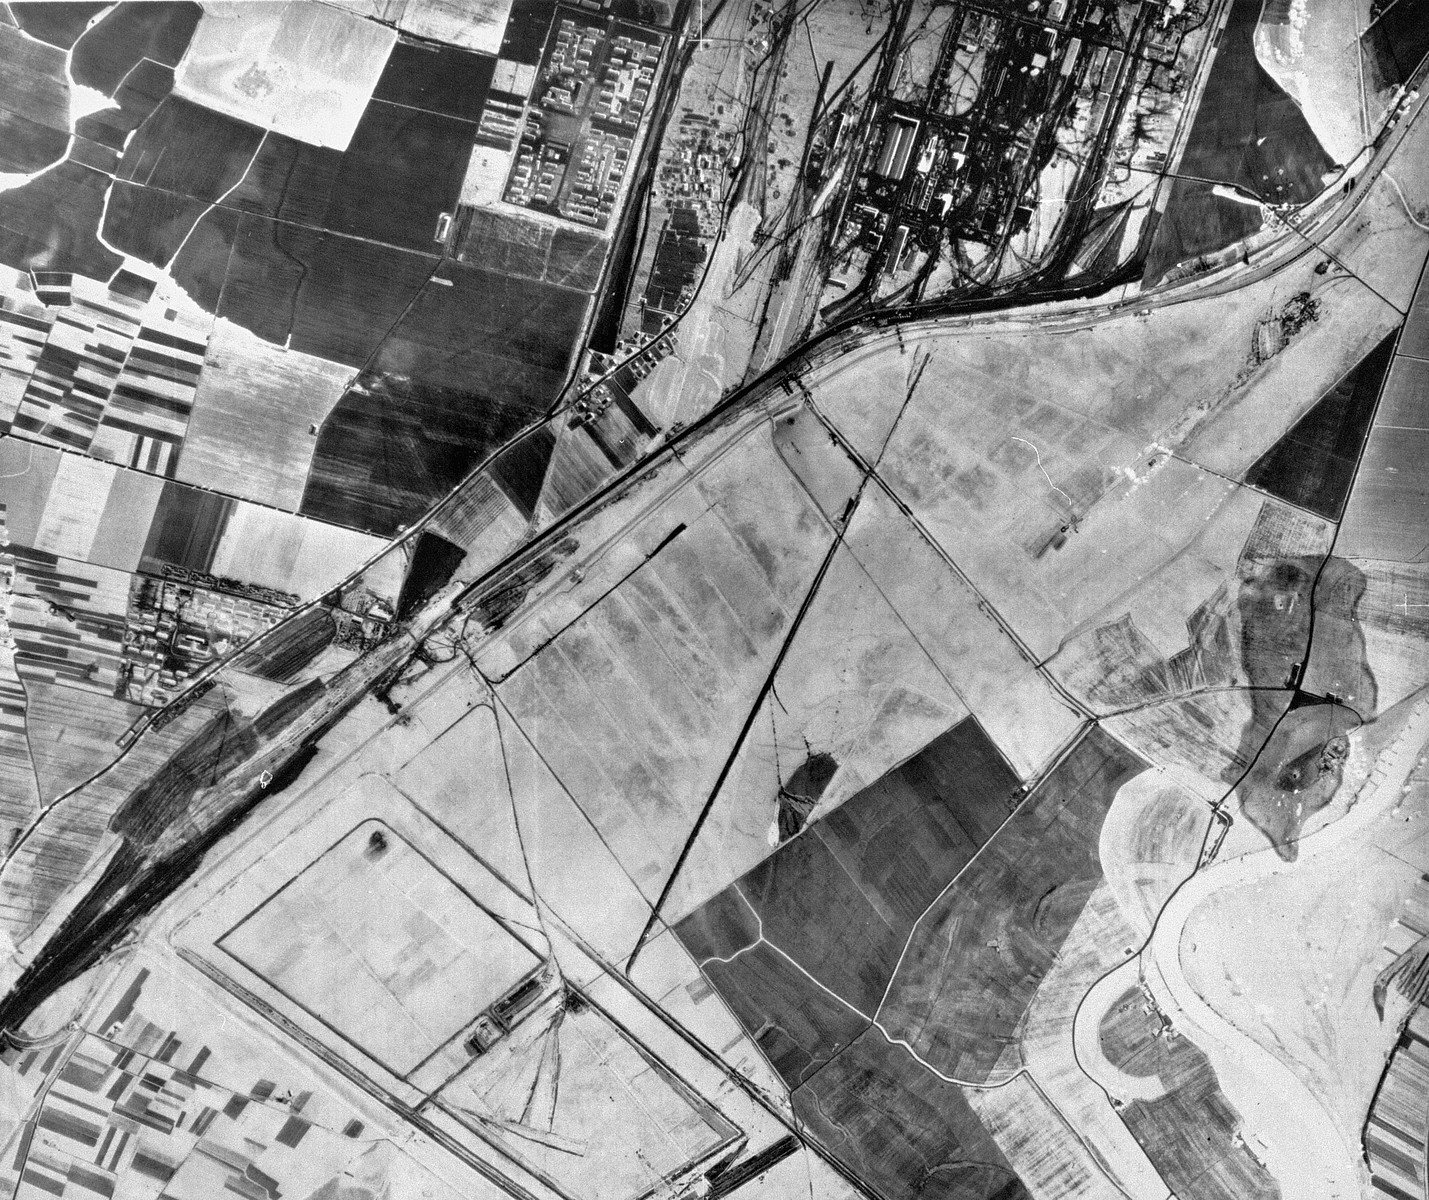 An aerial reconnaissance photograph of the Auschwitz area showing a partial view of the I.G. Farben "Buna" complex with the adjacent Monowitz (Auschwitz III).